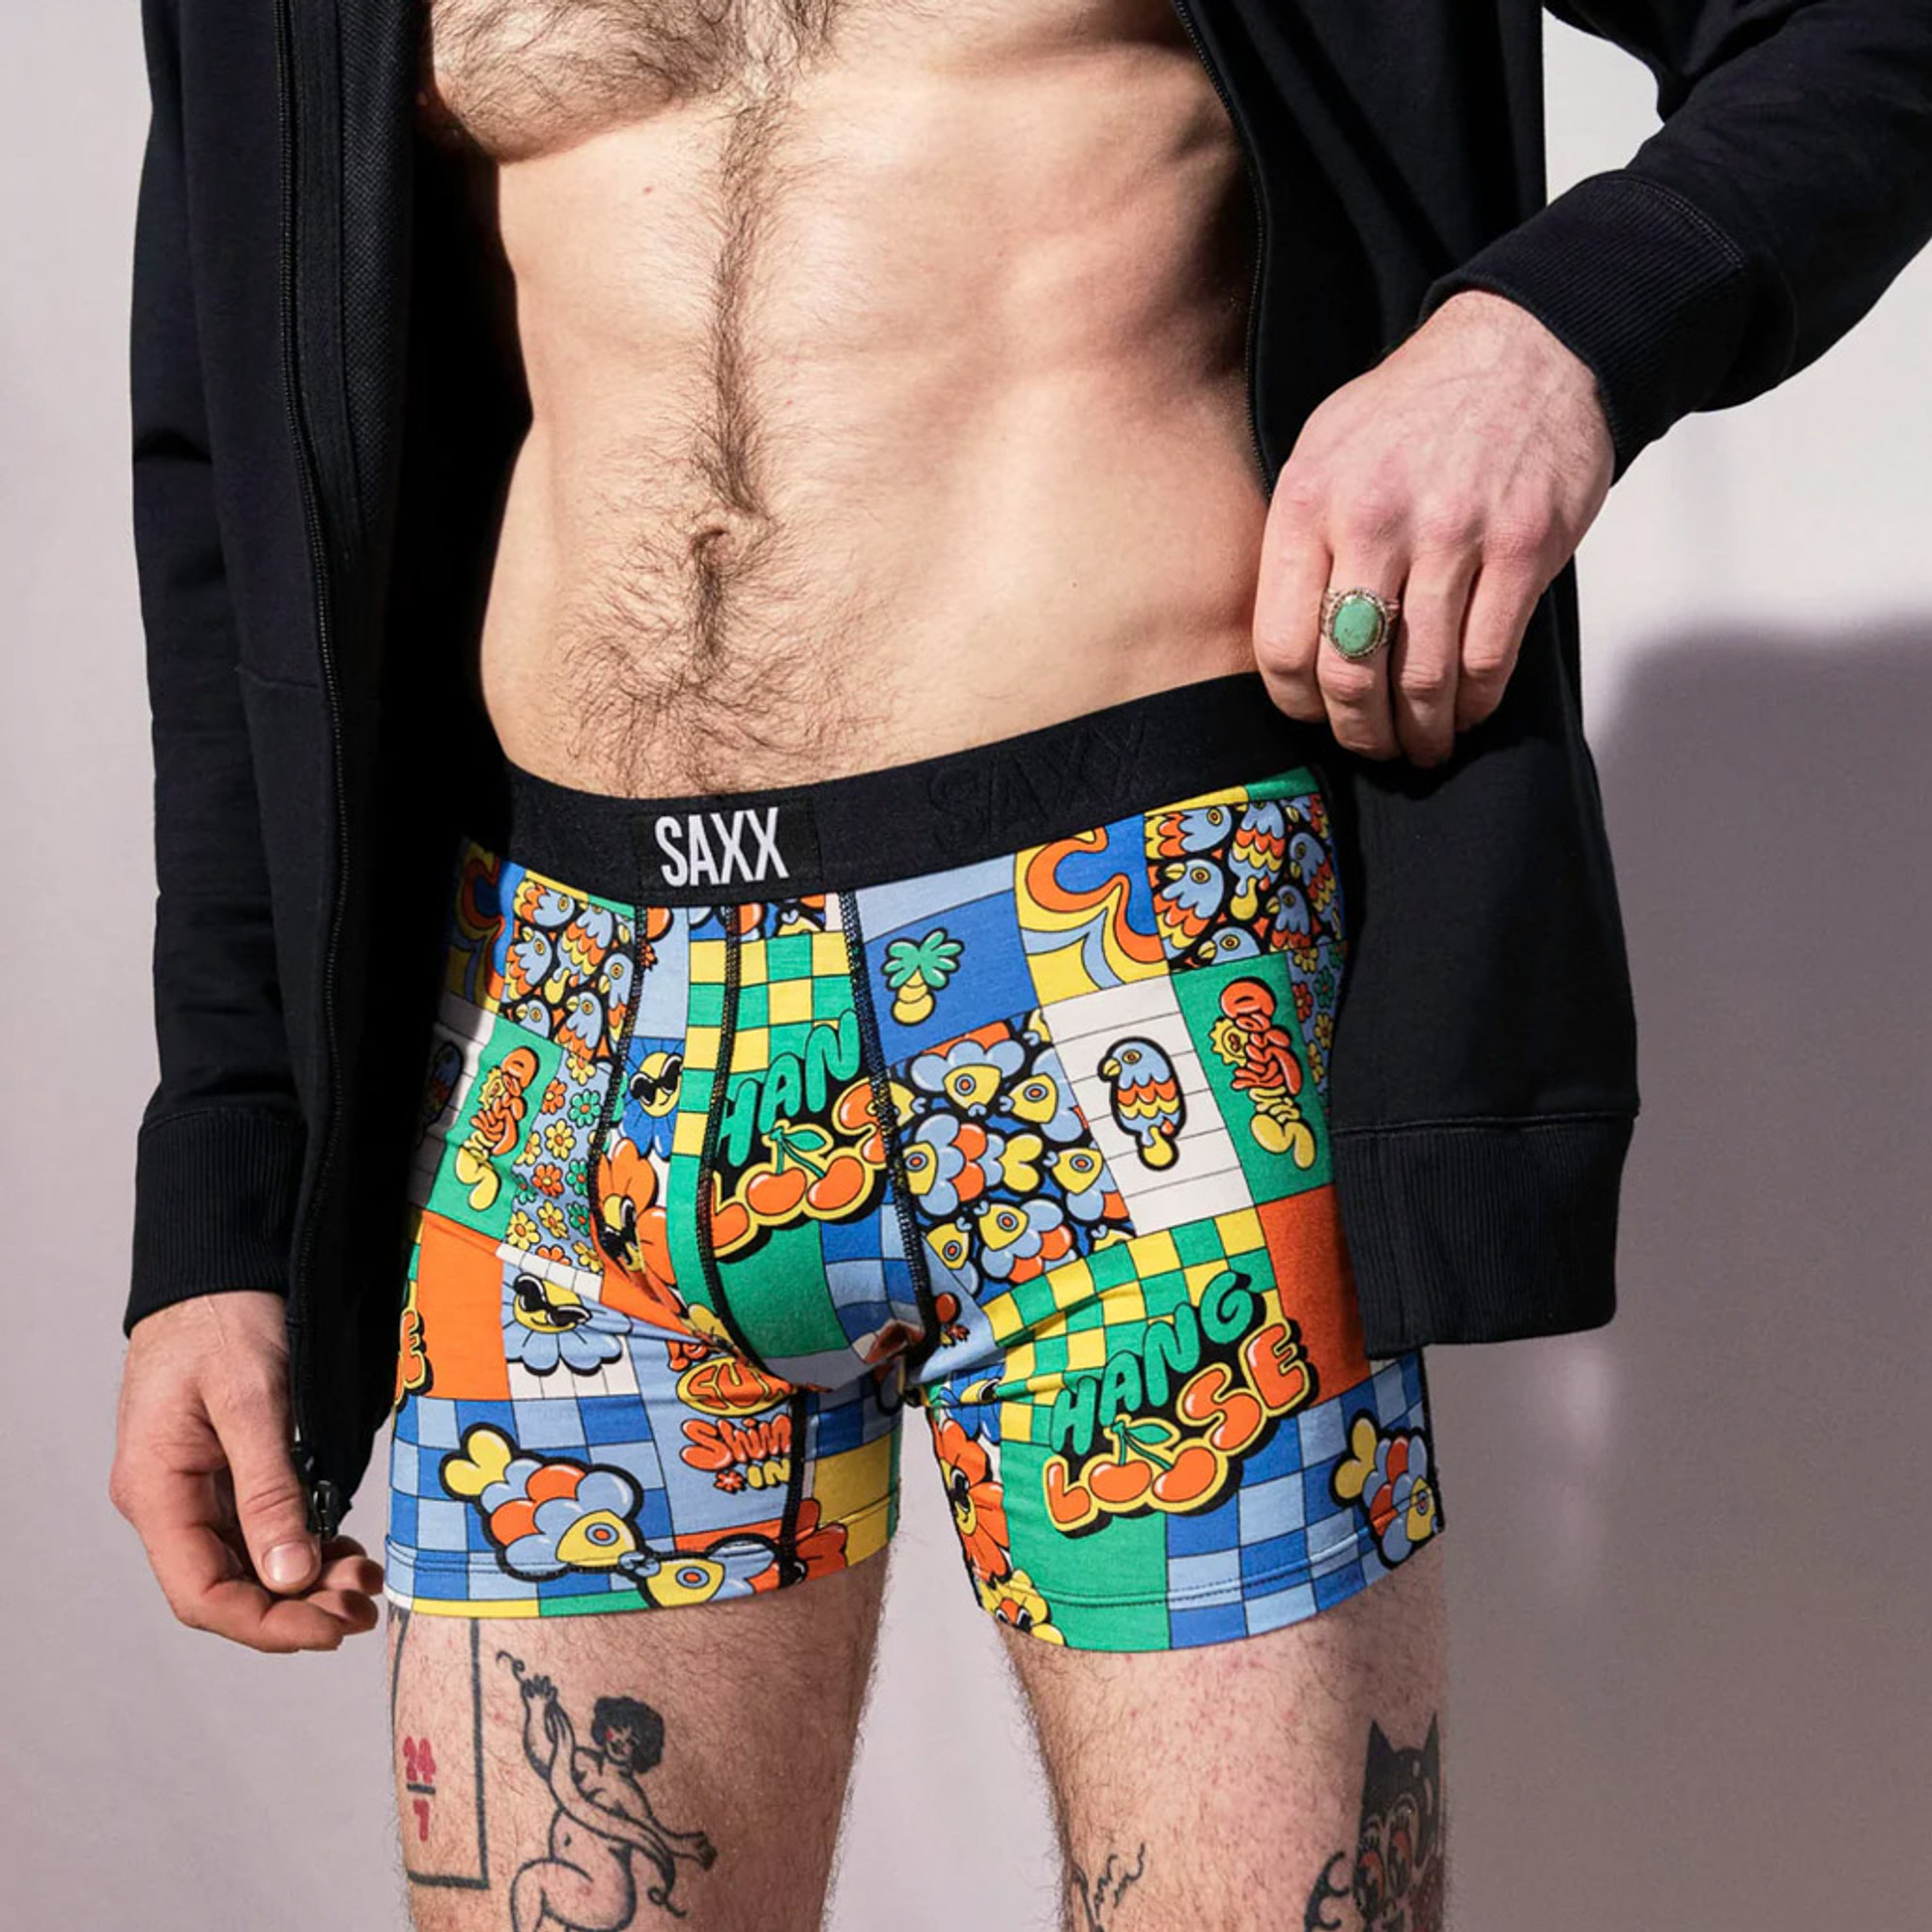 SAXX VIBE BOXER BRIEF YEAR OF THE DRAGON